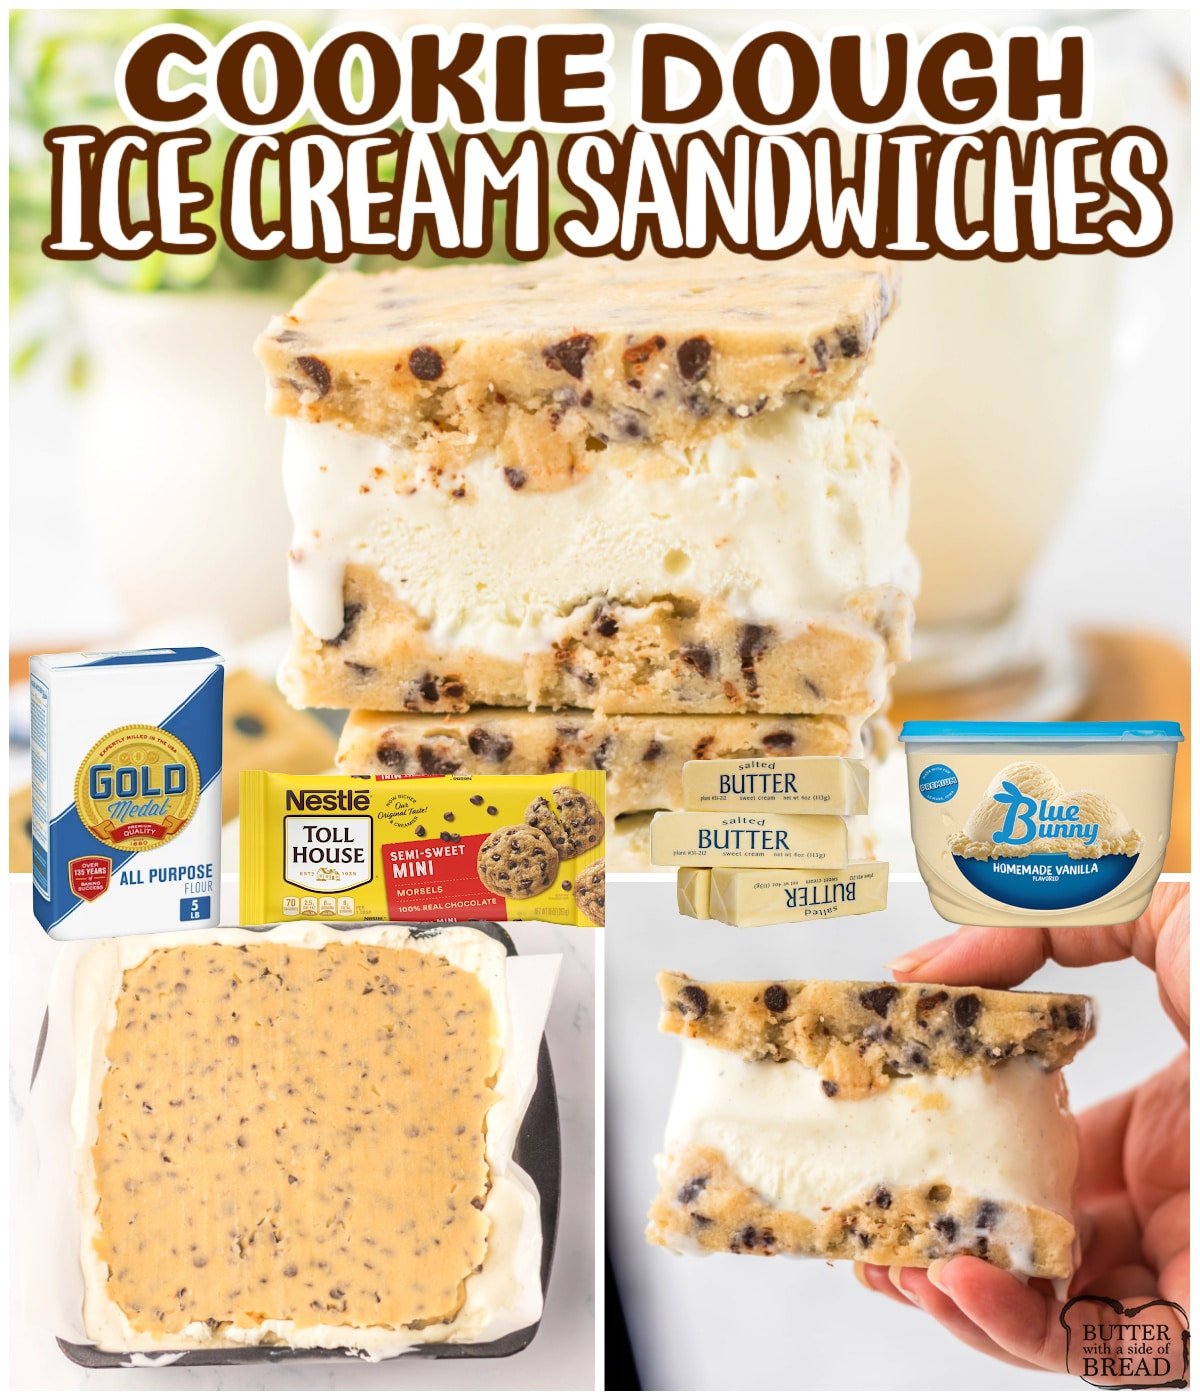 Cookie Dough Ice Cream Sandwiches are perfect for summer! Add vanilla ice cream between two layers of homemade chocolate chip cookie dough to make this delicious no-bake dessert. 